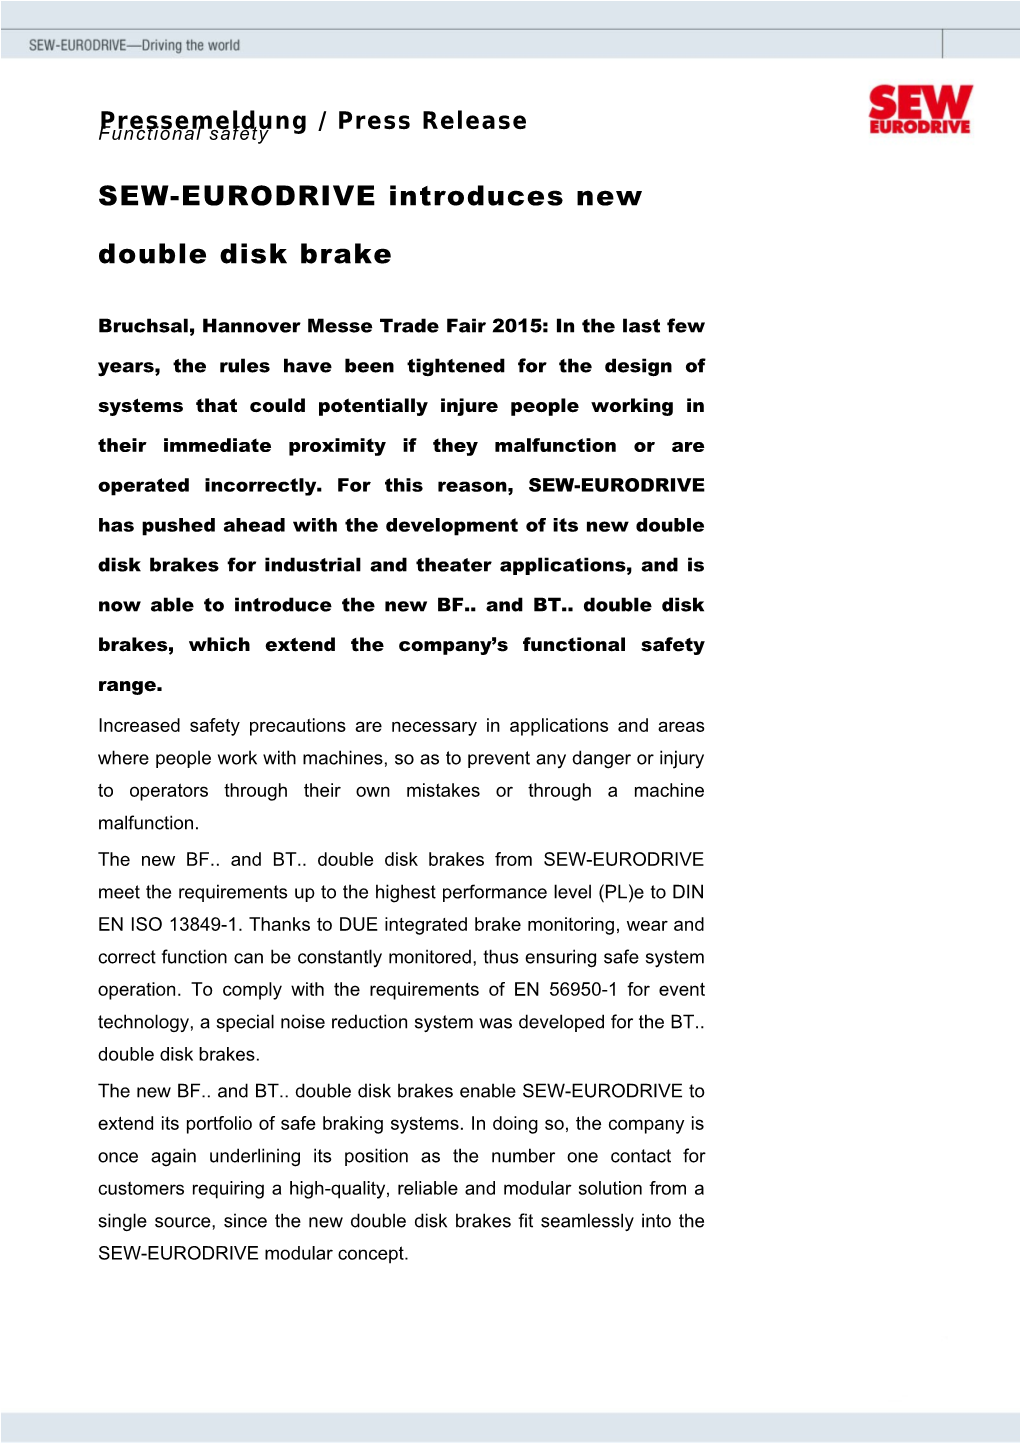 SEW-EURODRIVE Introduces New Double Disk Brake